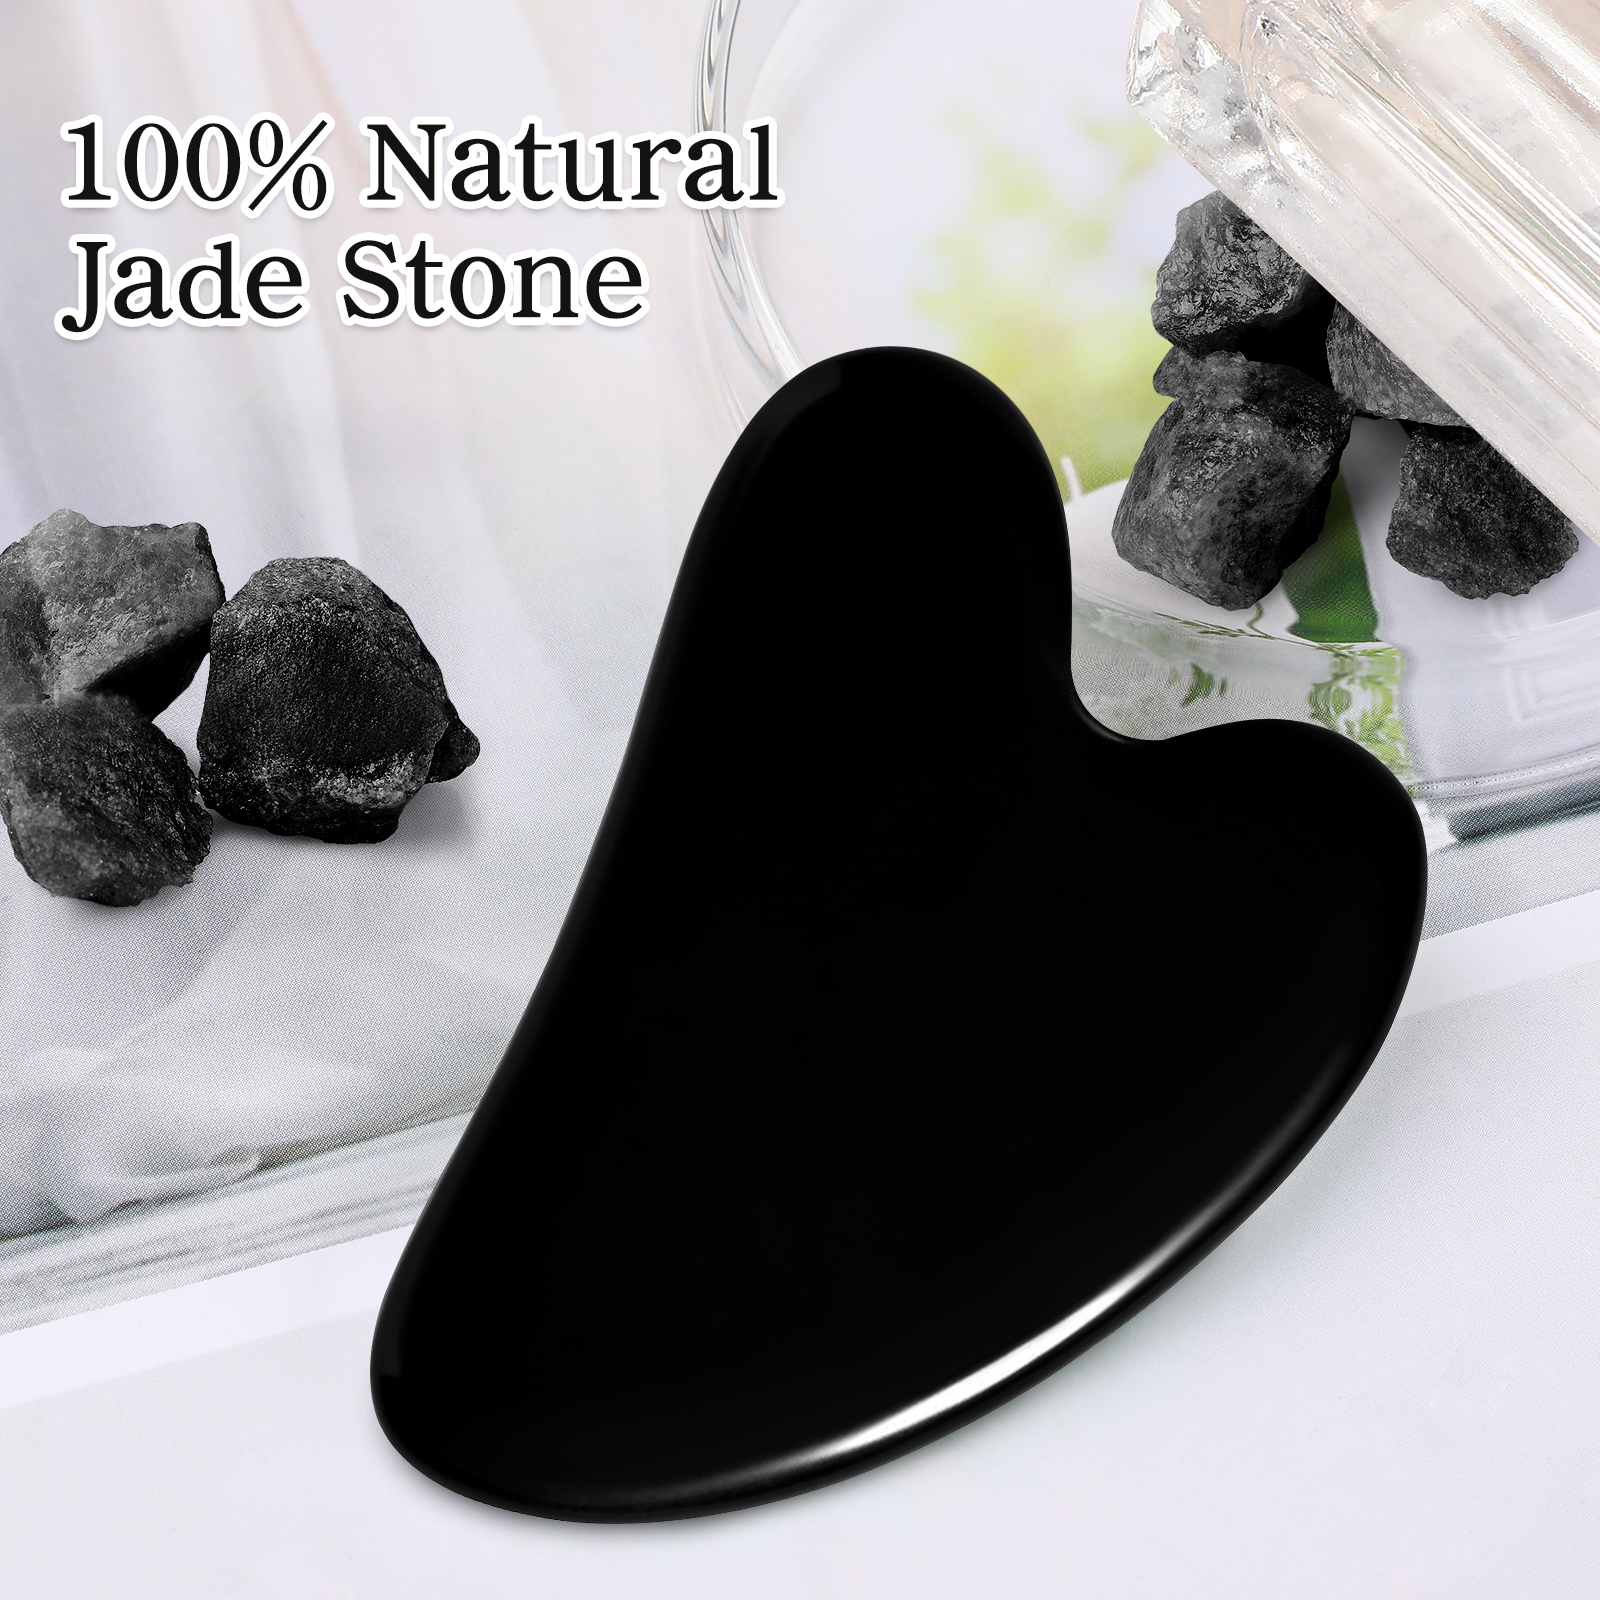 Black Gua Sha Jade Stone Tools Guasha Tool for Face Skincare Facial Body Relieve Muscle Tensions Reduce Puffiness Festive Gifts